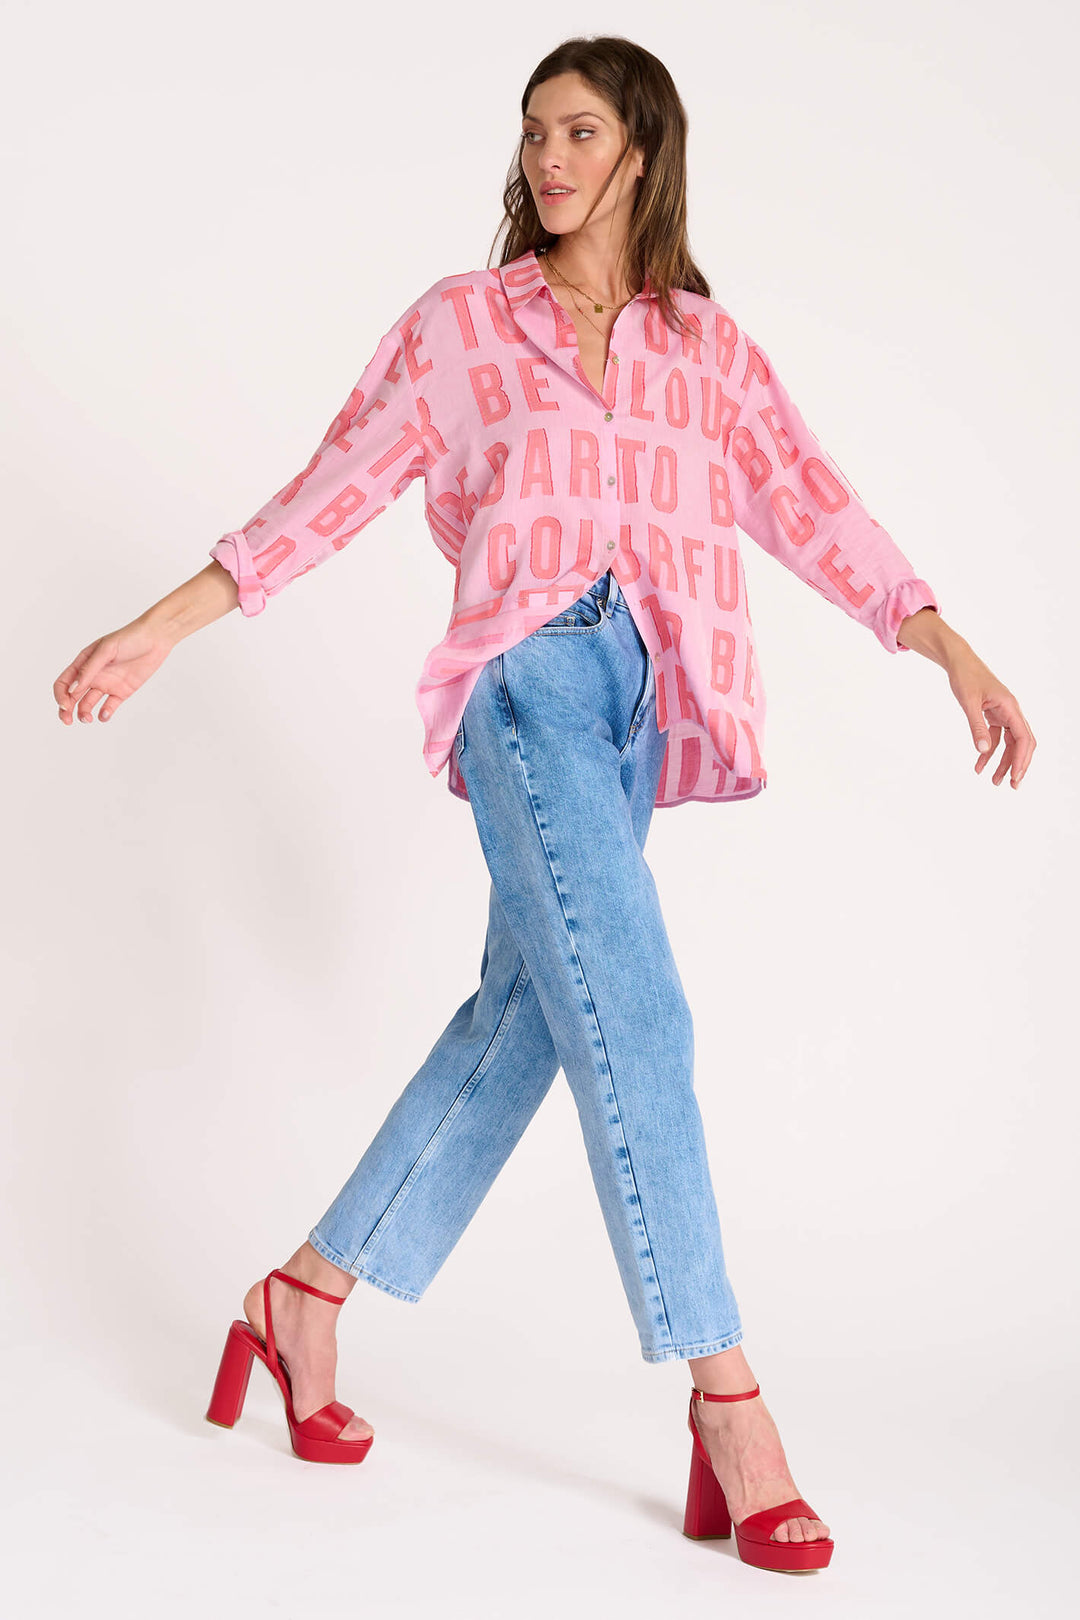 POM Amsterdam SP6833 Mila Dare To Be Pink Blouse - Shirley Allum Boutique